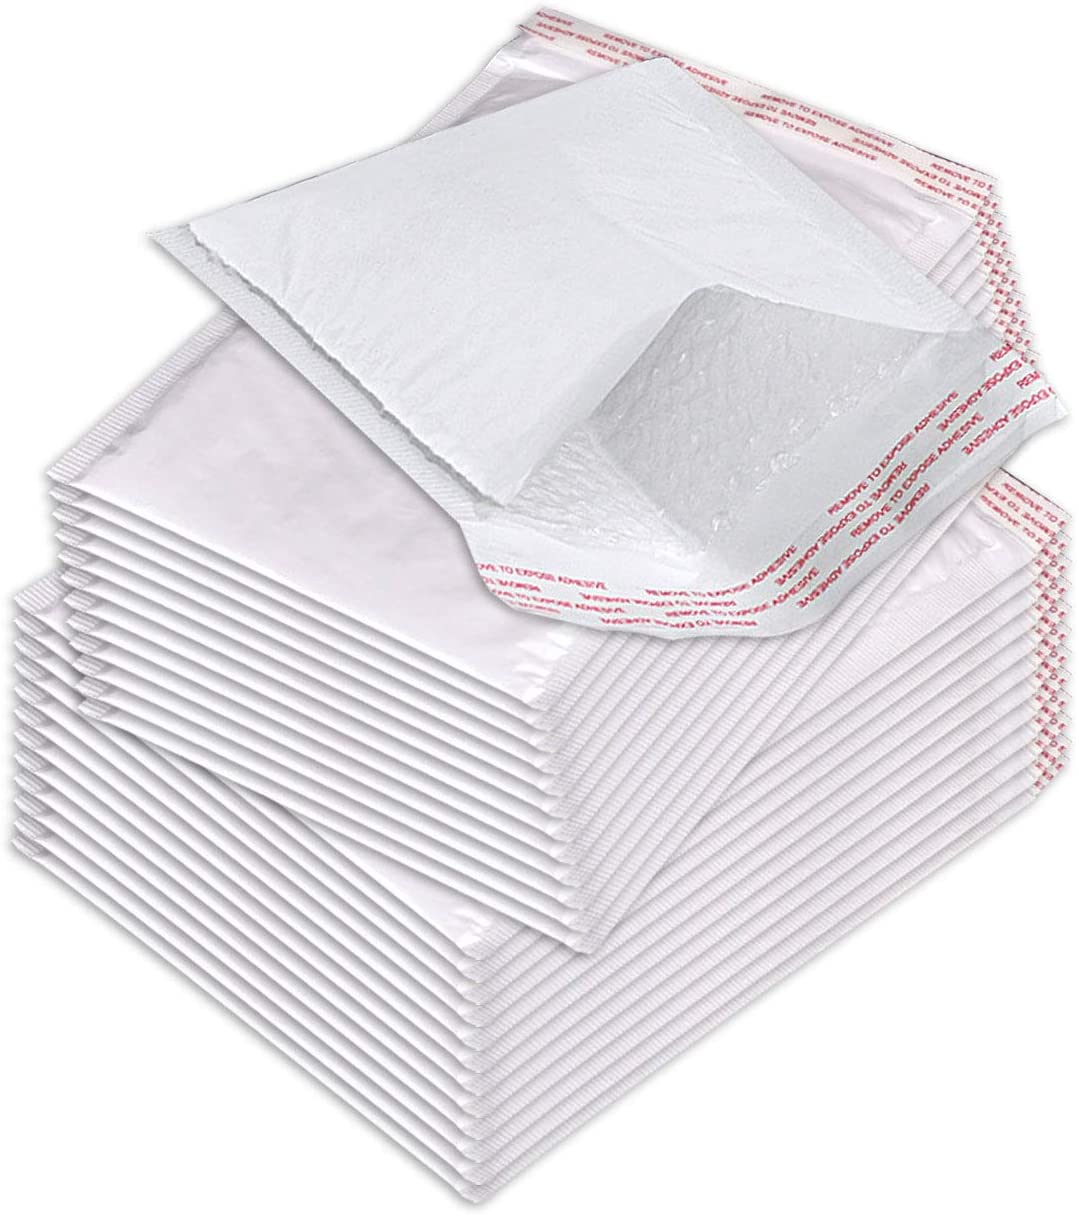 BM Paper 500 Pack 12.5" X 19" #6 Poly Bubble Mailers Envelopes Padded Shipping Bags